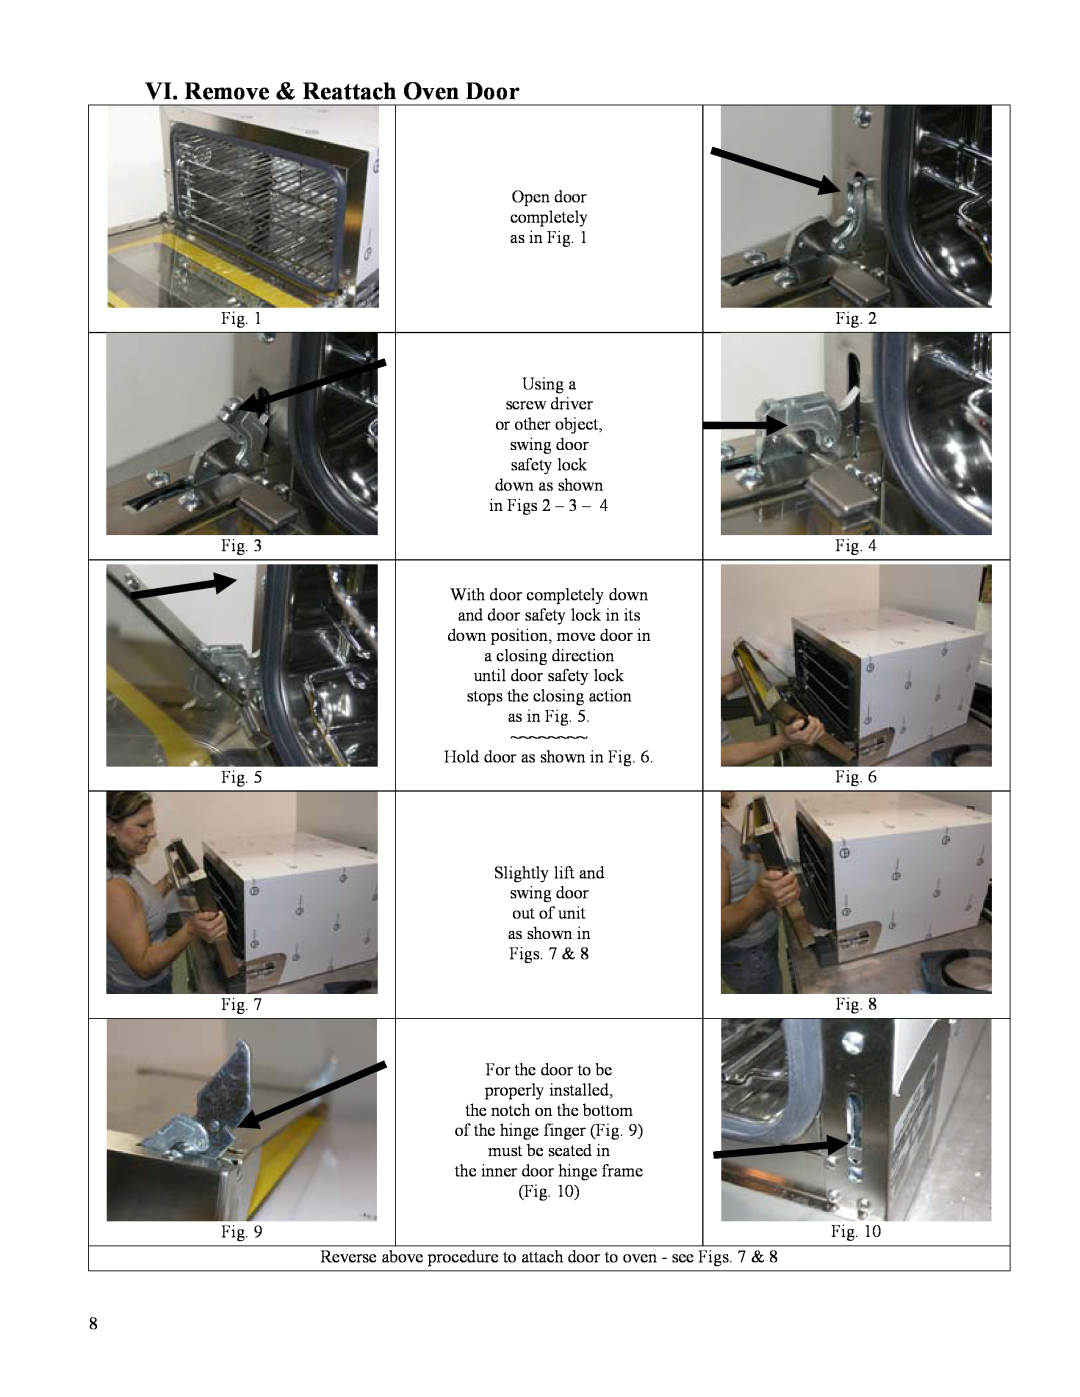 Cadco OV-023 VI. Remove & Reattach Oven Door, down as shown, stops the closing action, as shown in, must be seated in 